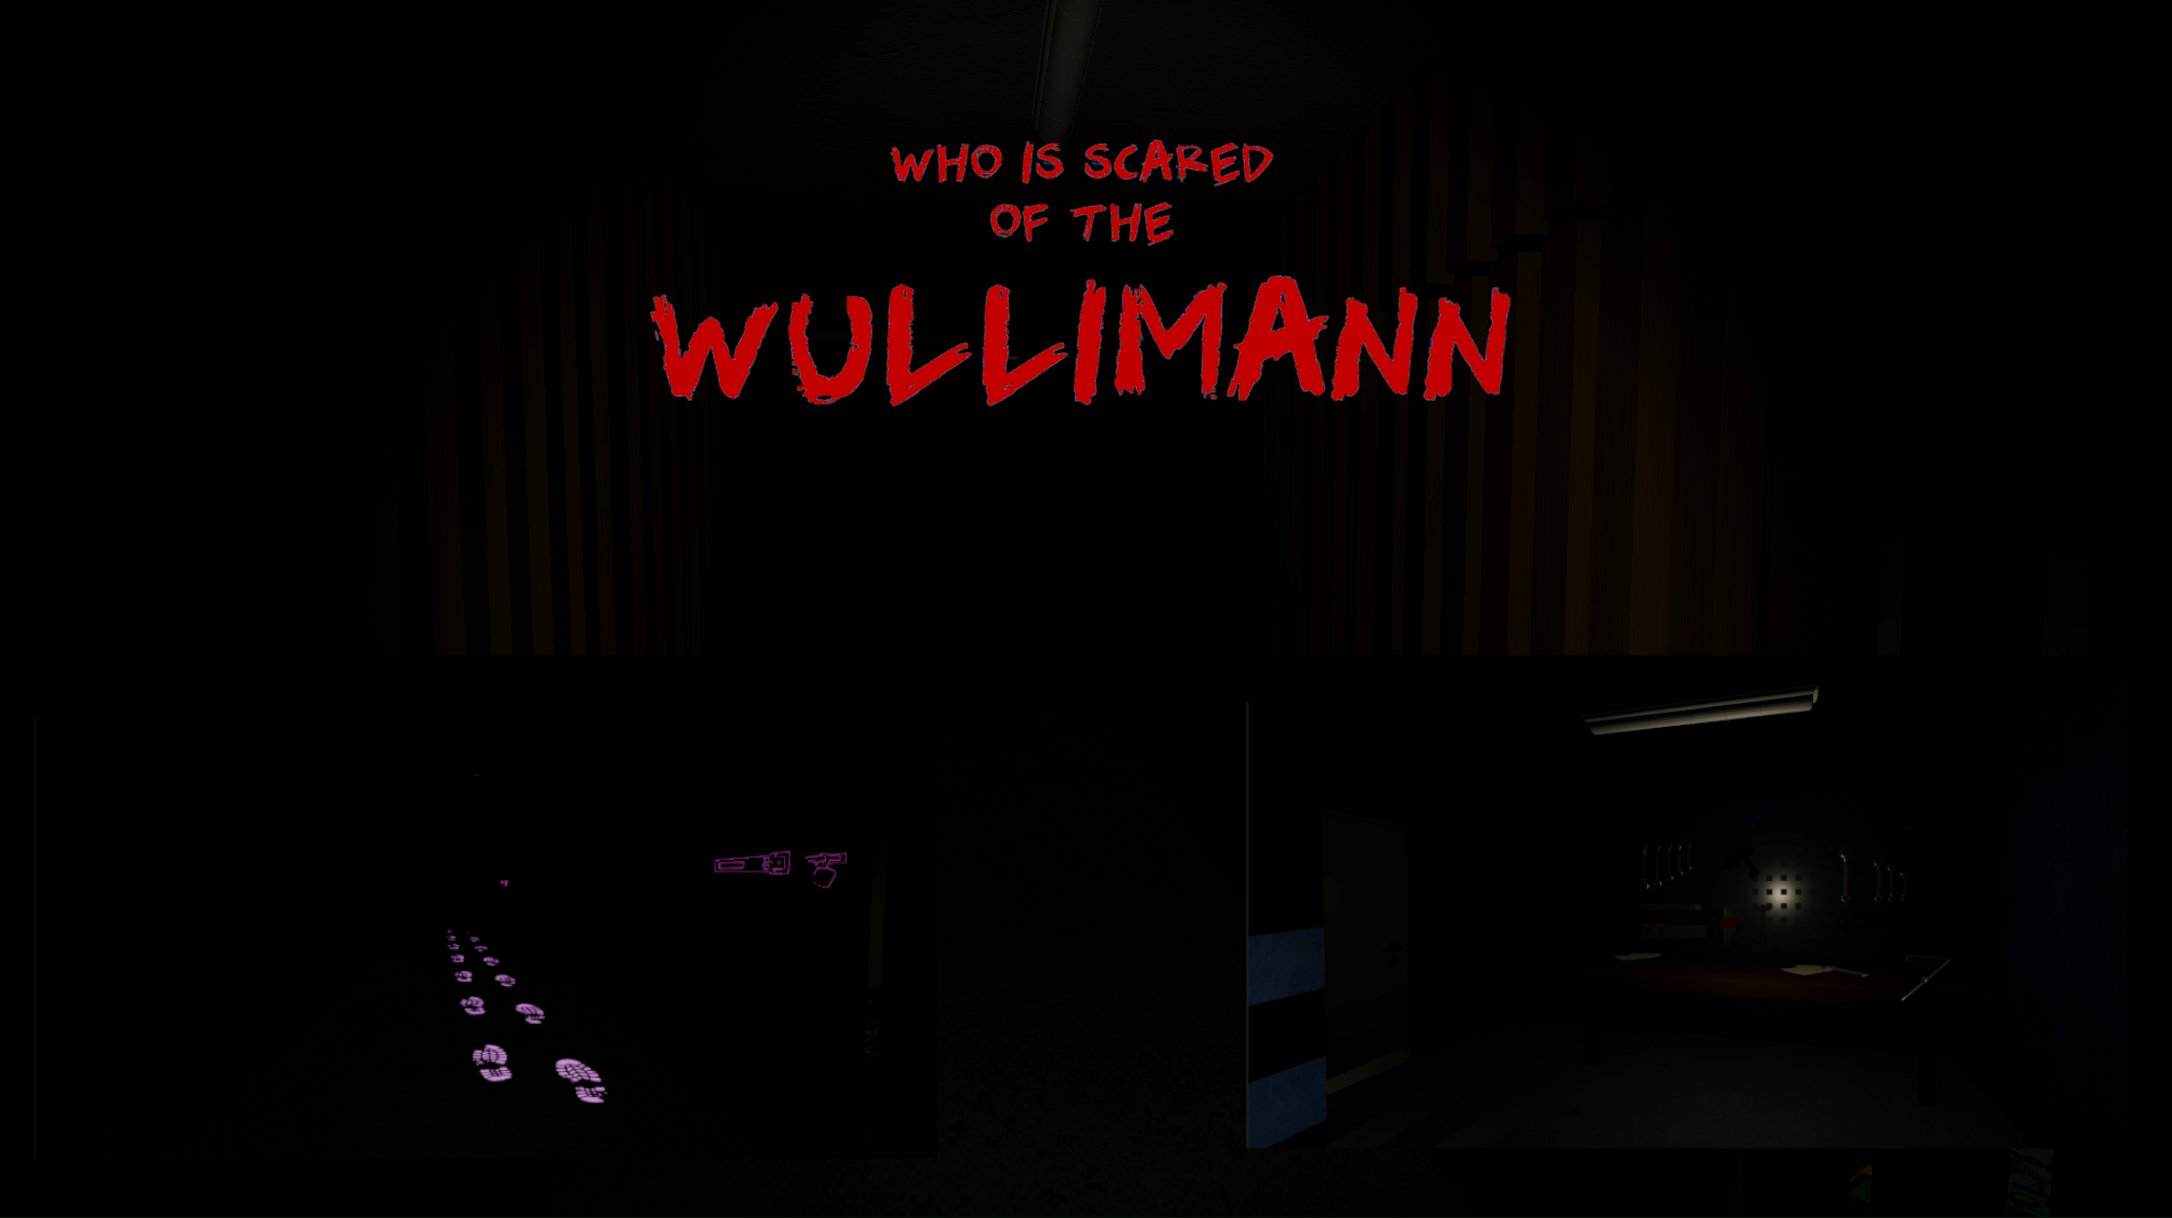 Who is scared of the Wullimann